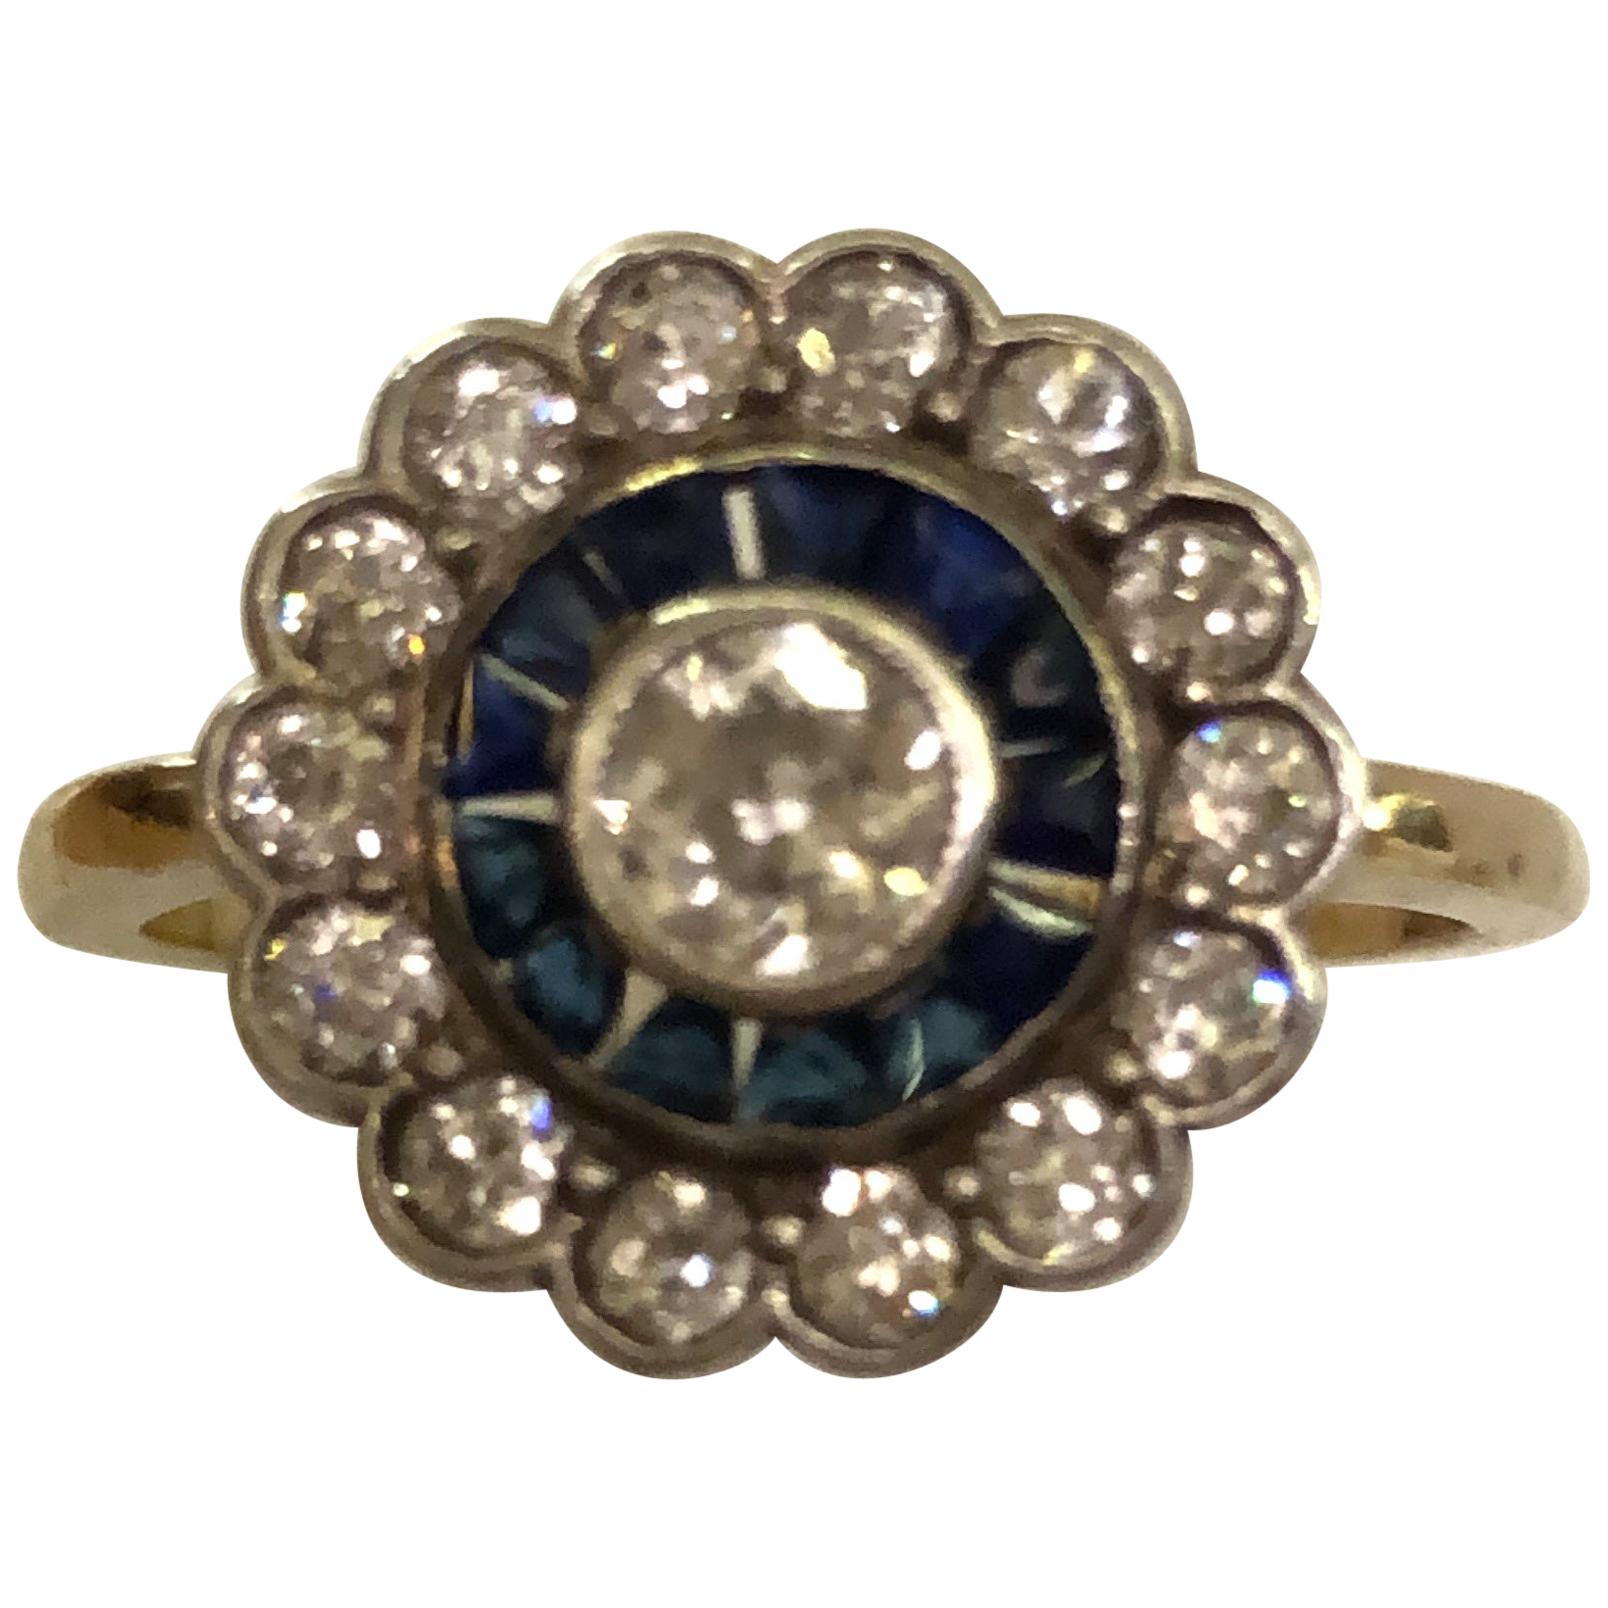 18 Karat Gold Sapphire and Diamond Ring For Sale